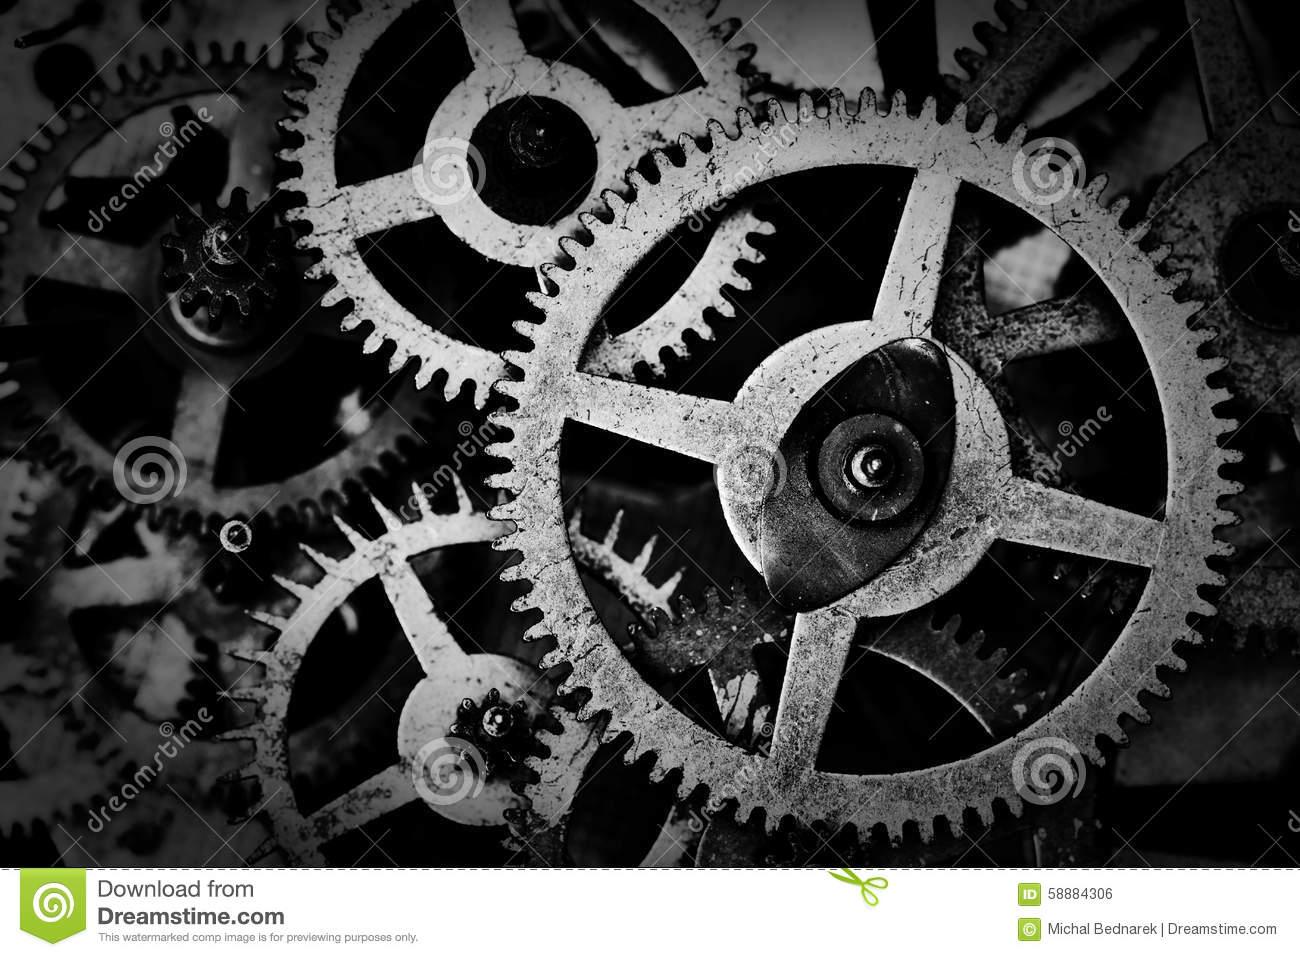 1300 x 957 · jpeg - Grunge Gear, Cog Wheels Black And White Background. Industrial, Science ...